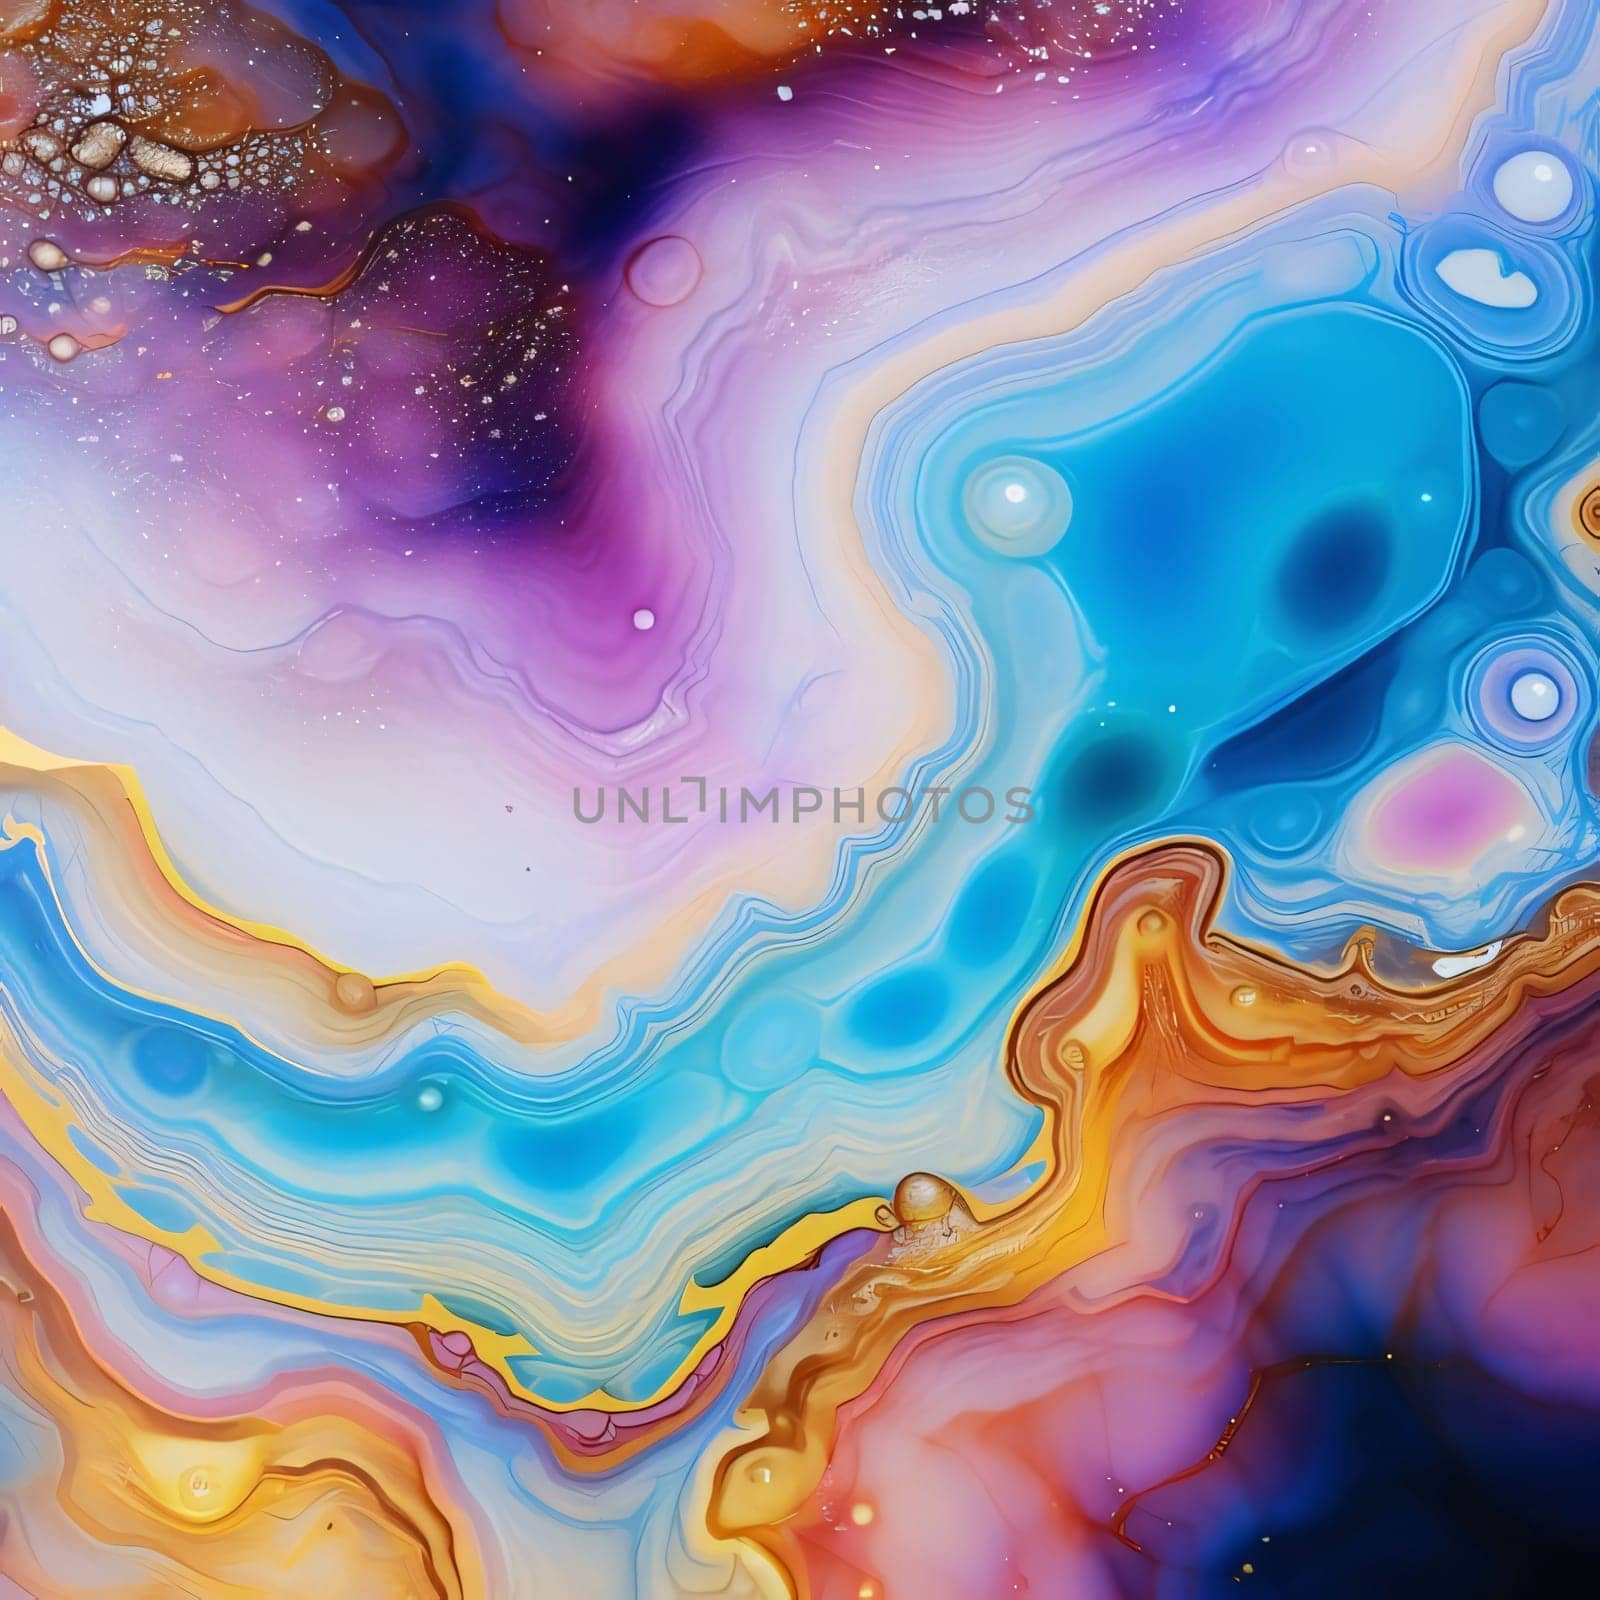 Abstract background design: Abstract background with a psychedelic pattern in blue, orange and purple colors